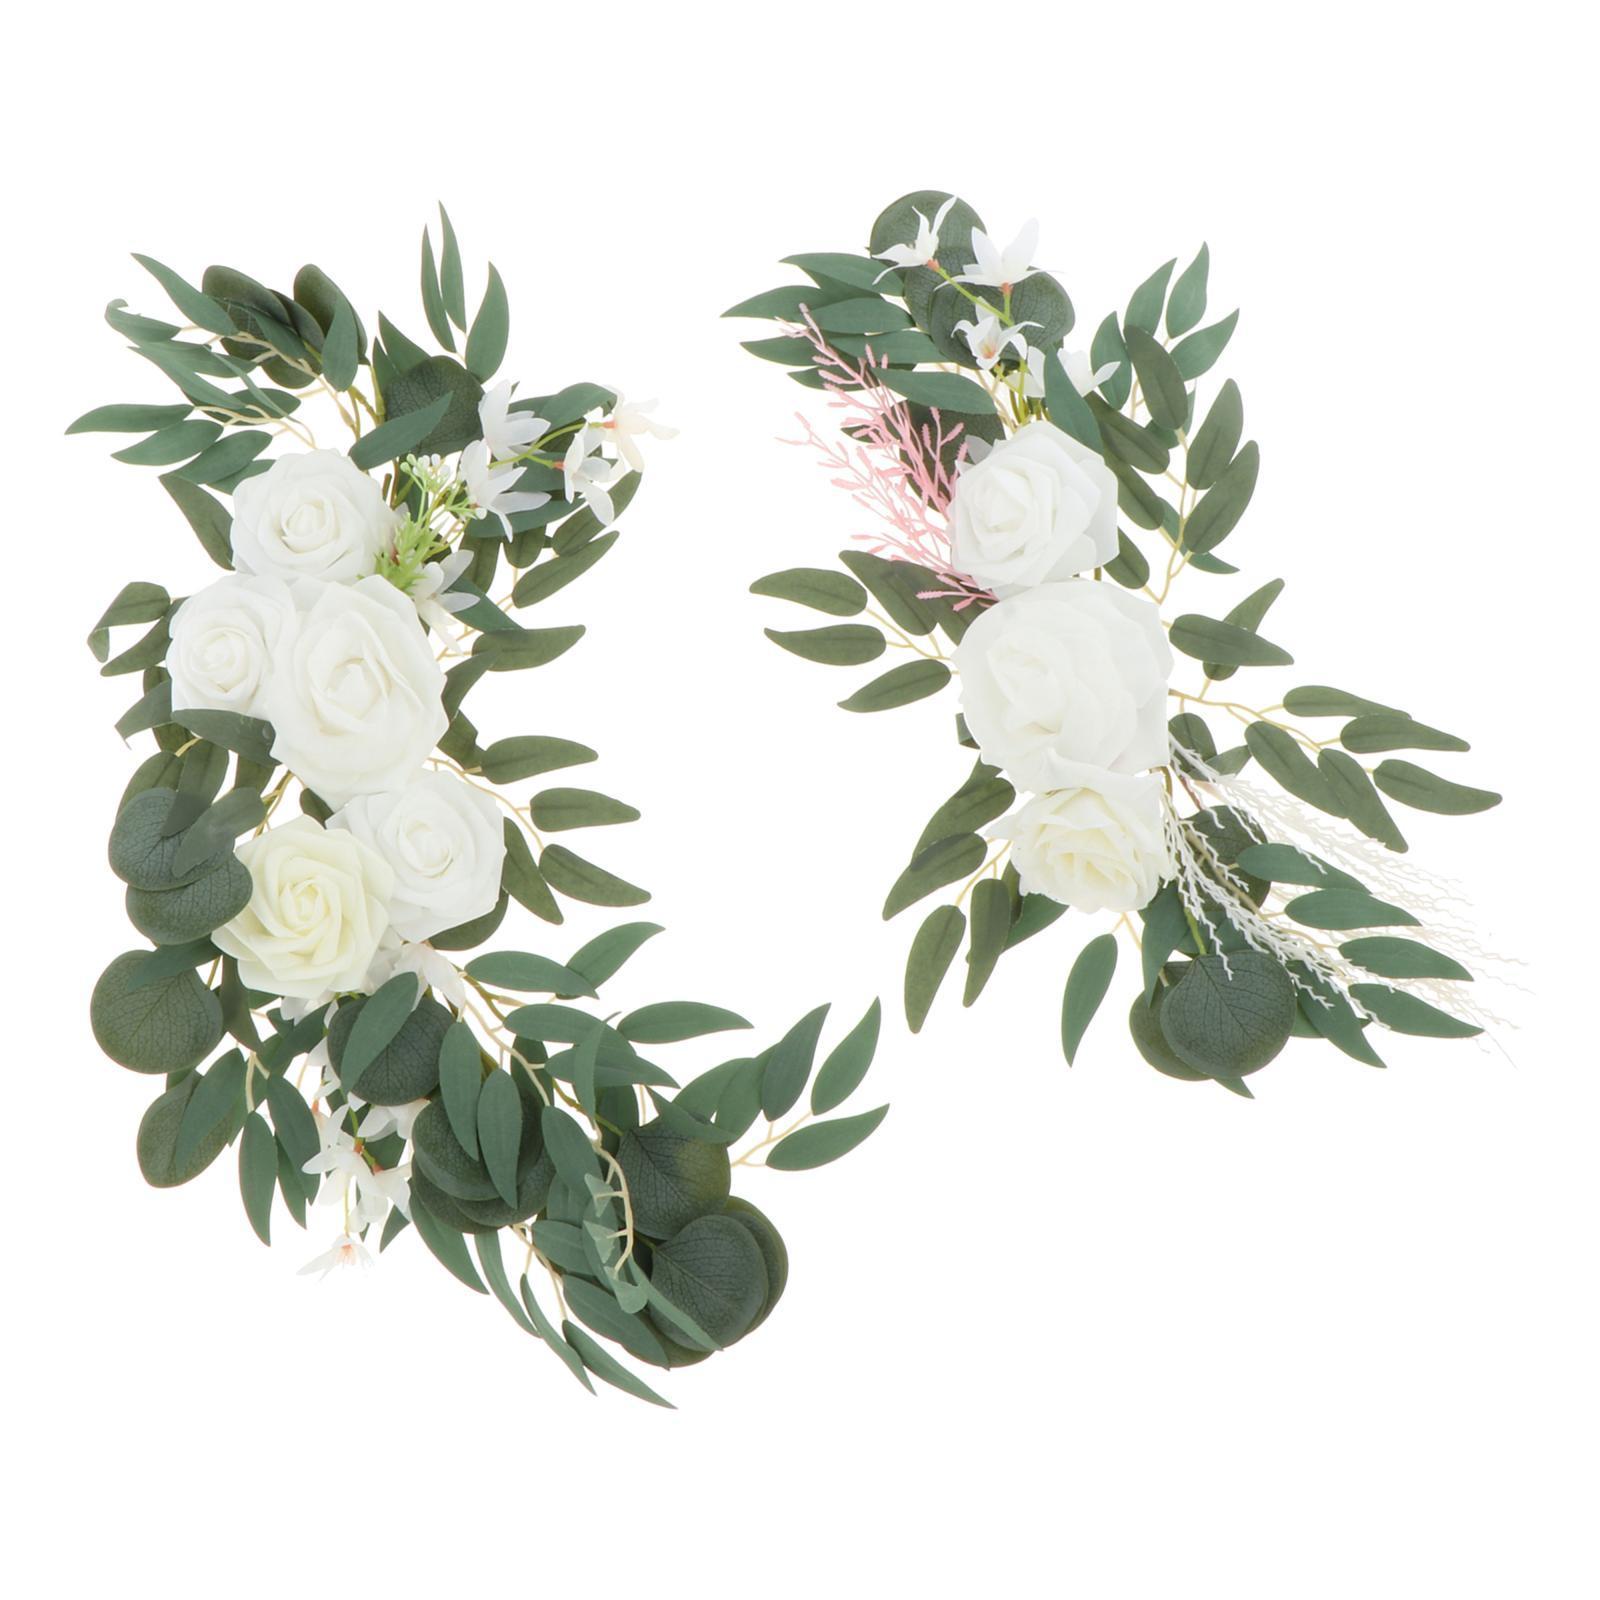 4x Artificial Floral Arch Flowers Swag Garland for Wedding Decor